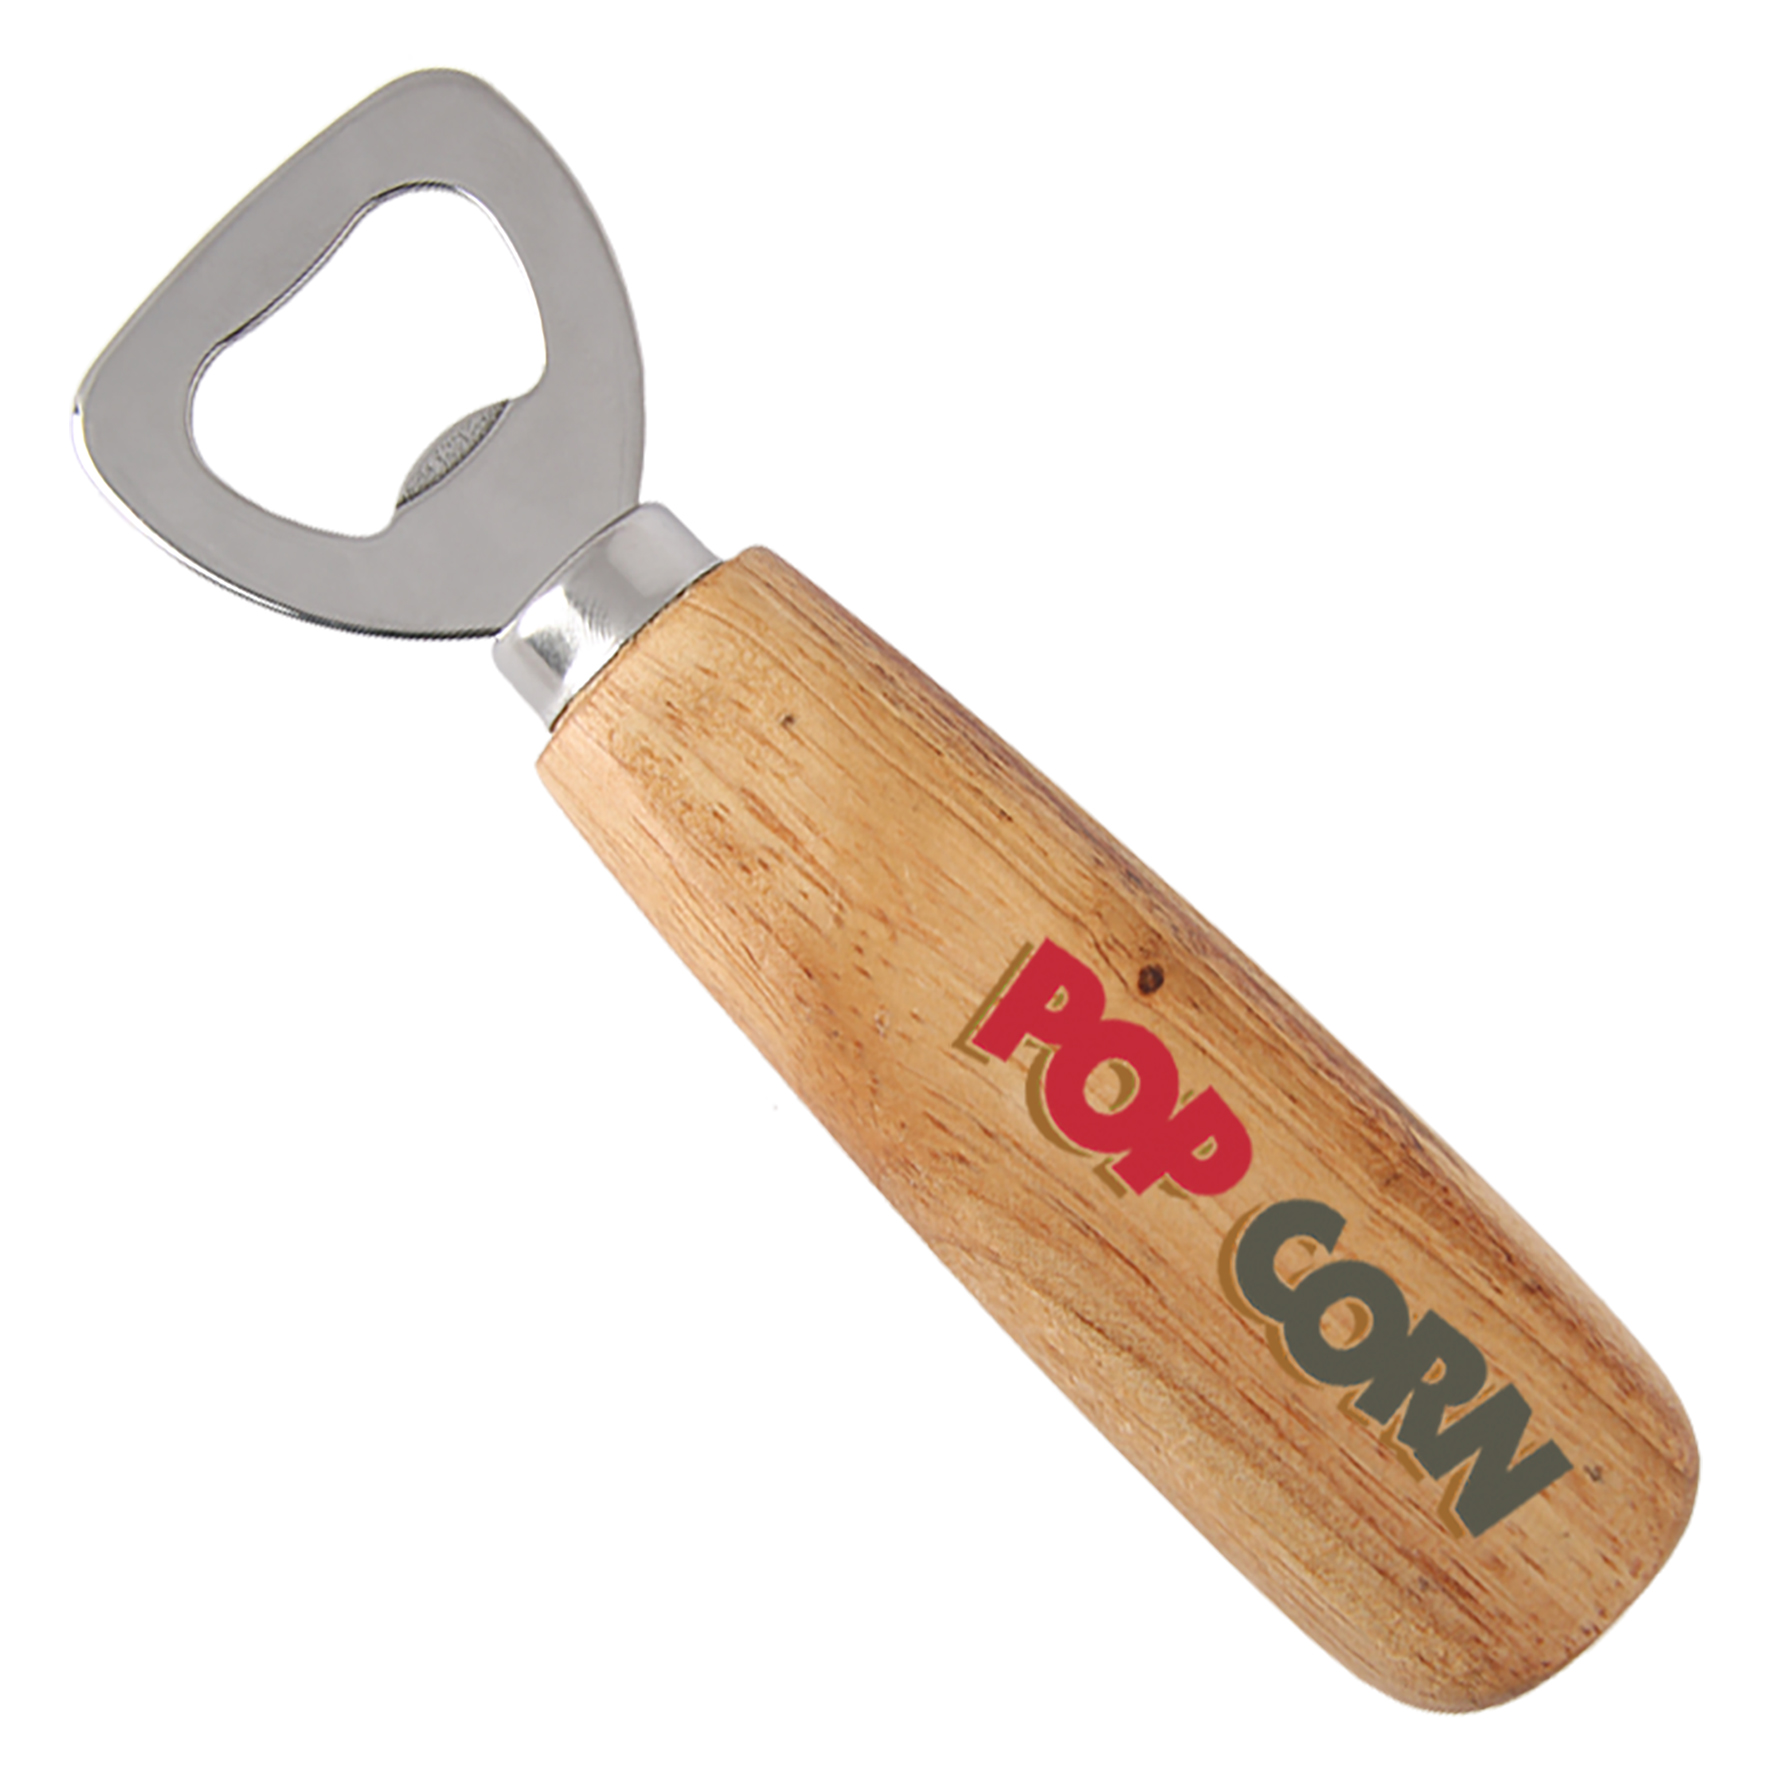 x840009 11 - Hard hat bottle opener and key chain